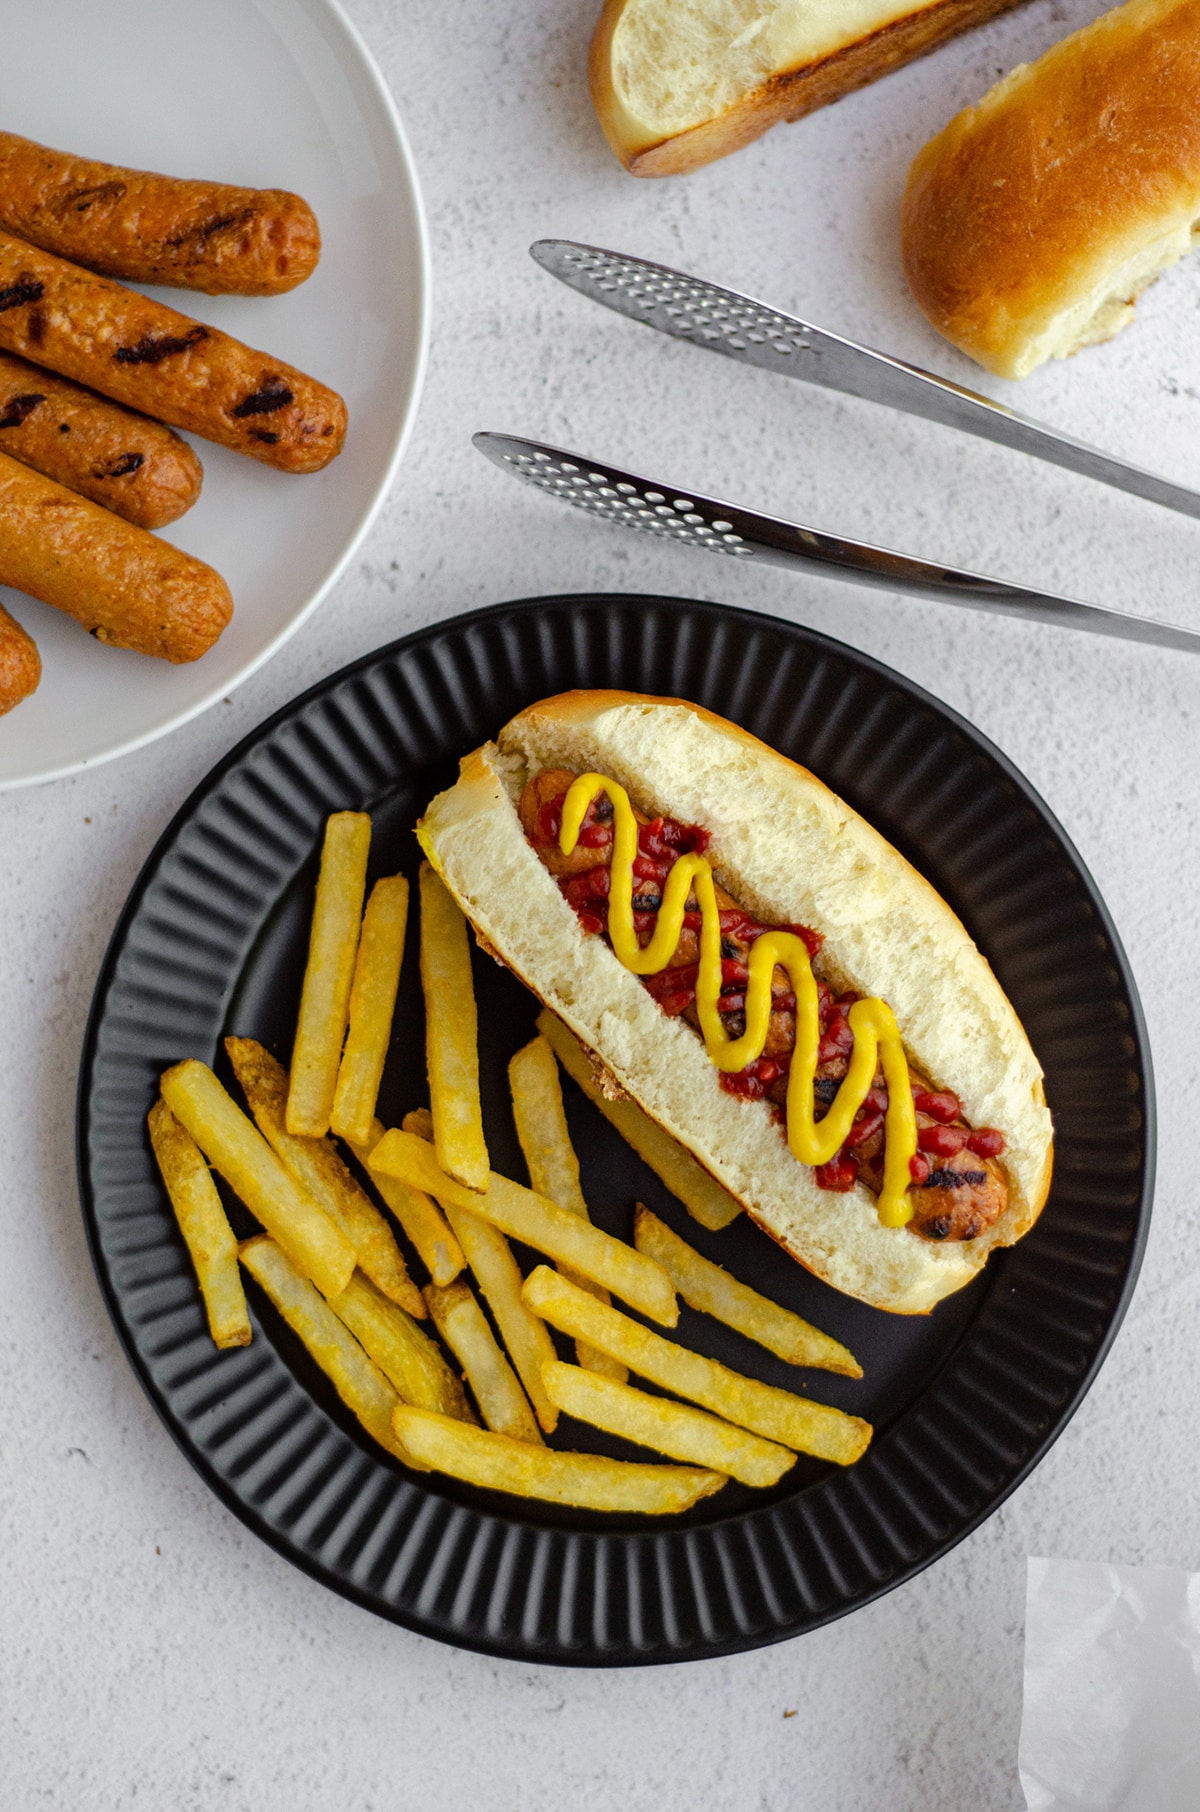 aerial photo of hot dog in a homemade hot dog bun with a squirts of ketchup and mustard sitting on a black plate with french fries